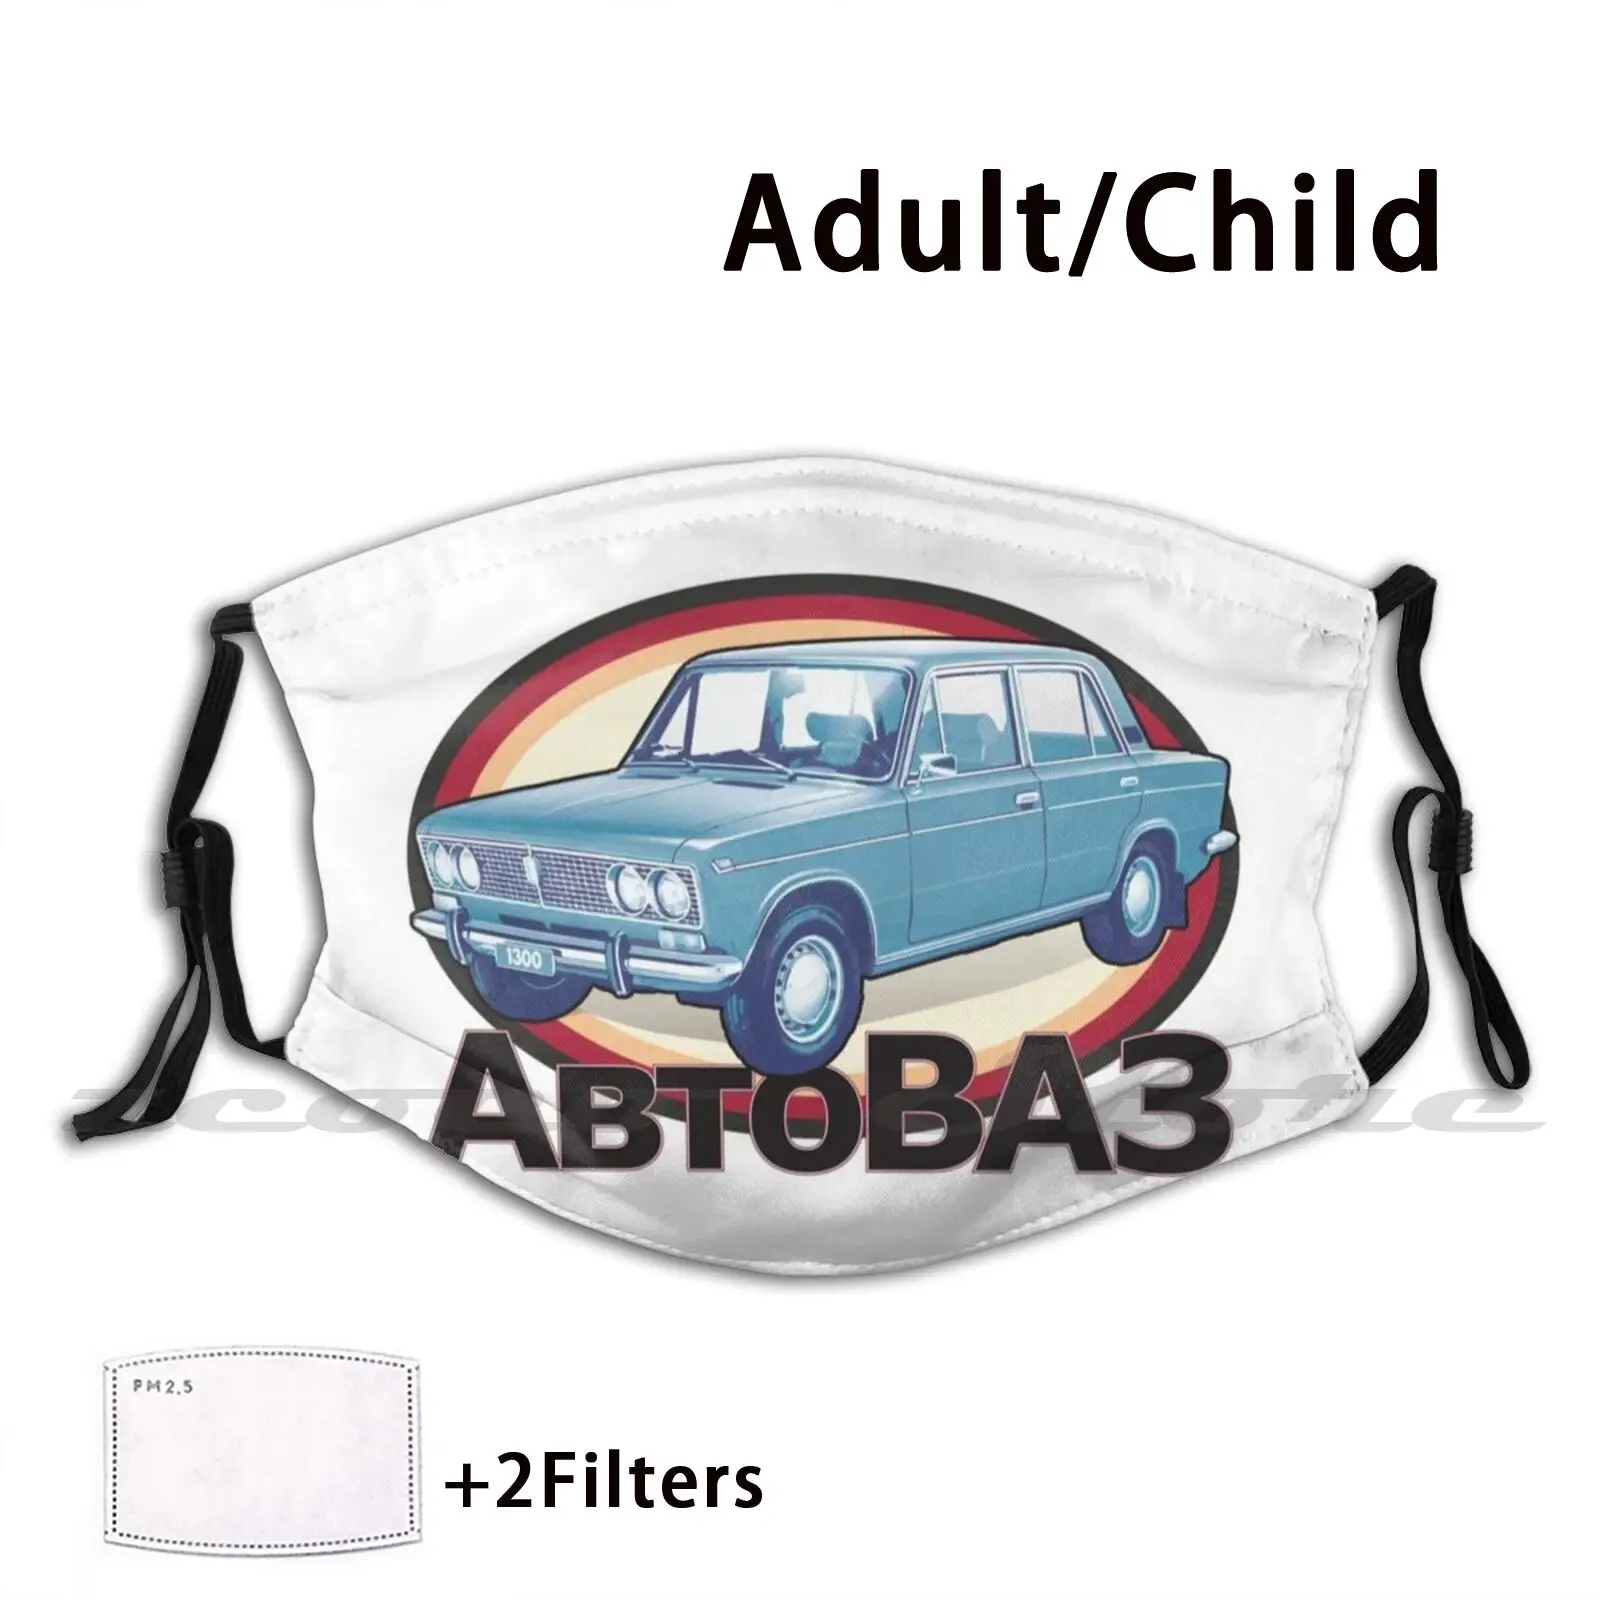 

Avtovaz 2103 ( On White ) Mask Diy Washable Filter Pm2.5 Mouth Trending Off Road Car Geeky Funny 4X4 Russian Vaz Autovaz Lada